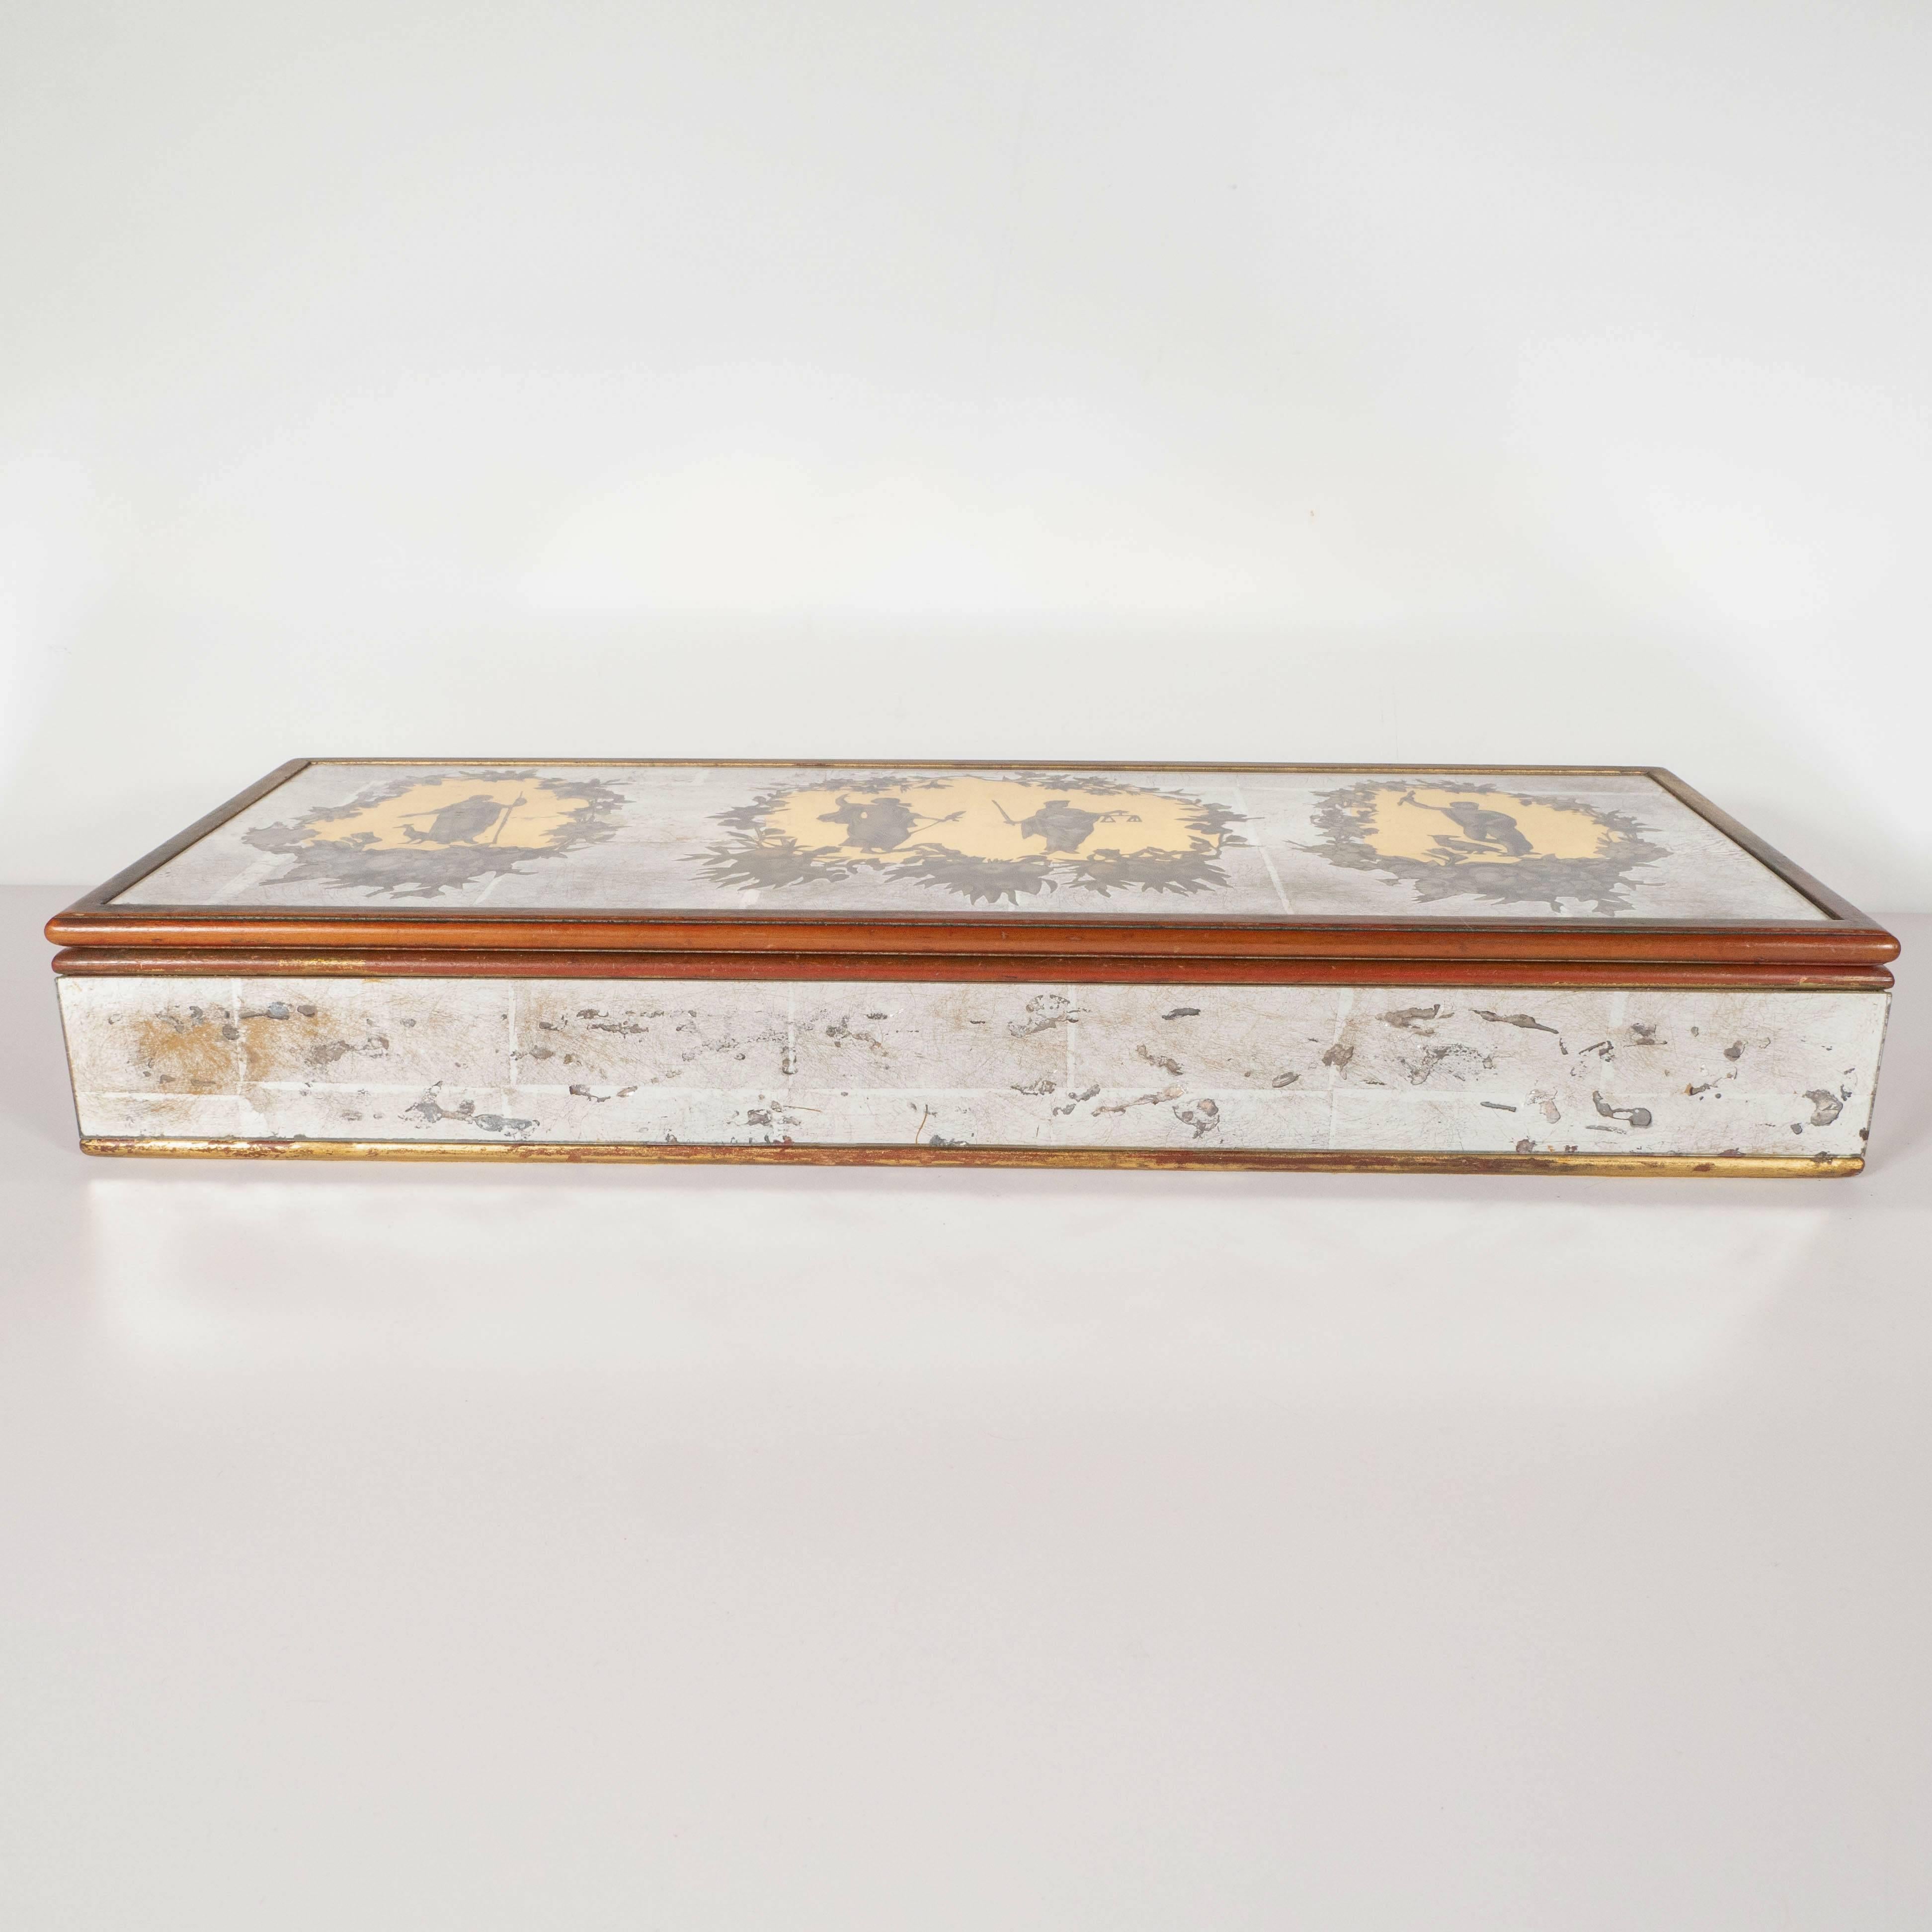 This stunning Mid-Century Modern Reverse Eglomisé white and yellow gold mirrored box was realized by the fabled Italian artist Piero Fornasetti. The piece features a giltwood frame with a white gold body. The top is adorned with neoclassical figures